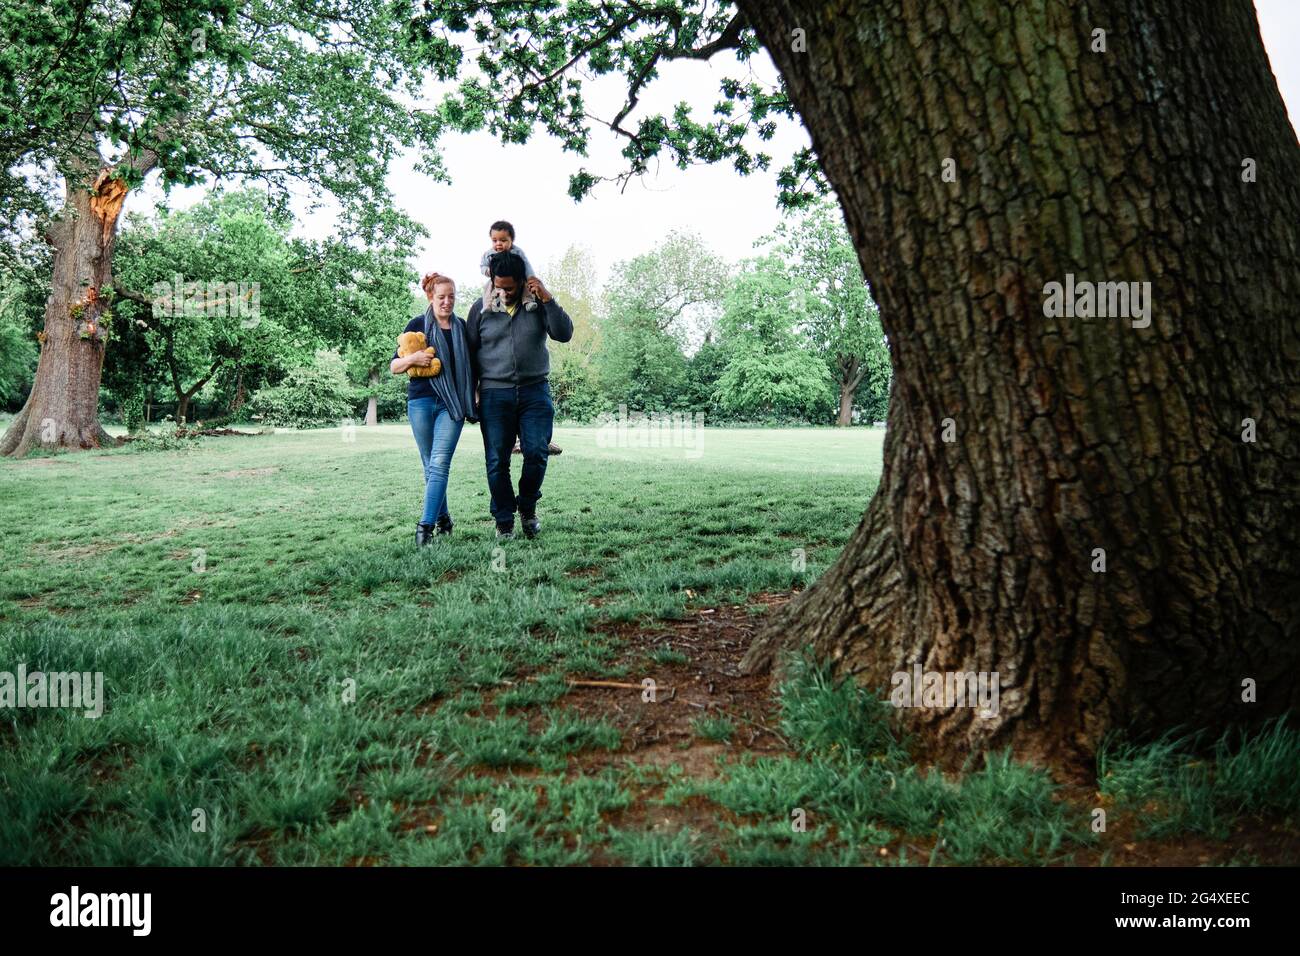 Father and mother walking on grass with son in park Stock Photo